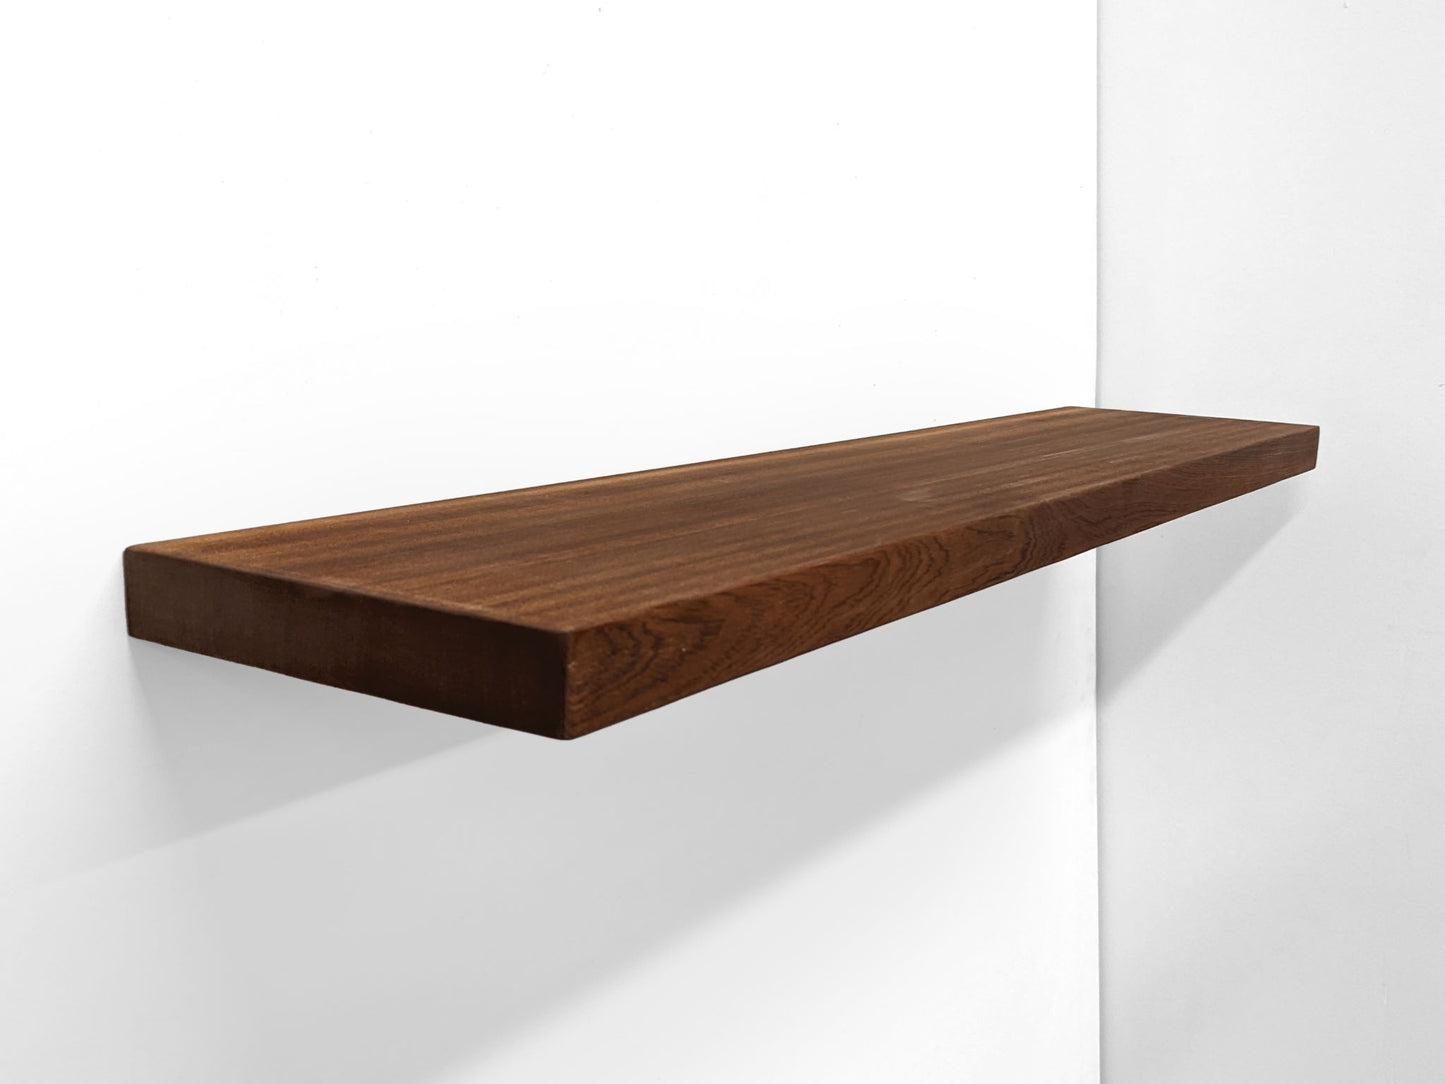 An extra-long, heavy-duty mahogany floating shelf is sucessfully installed and sits securely on a wall. Two hands grip the top and bottom of the front-facing side.